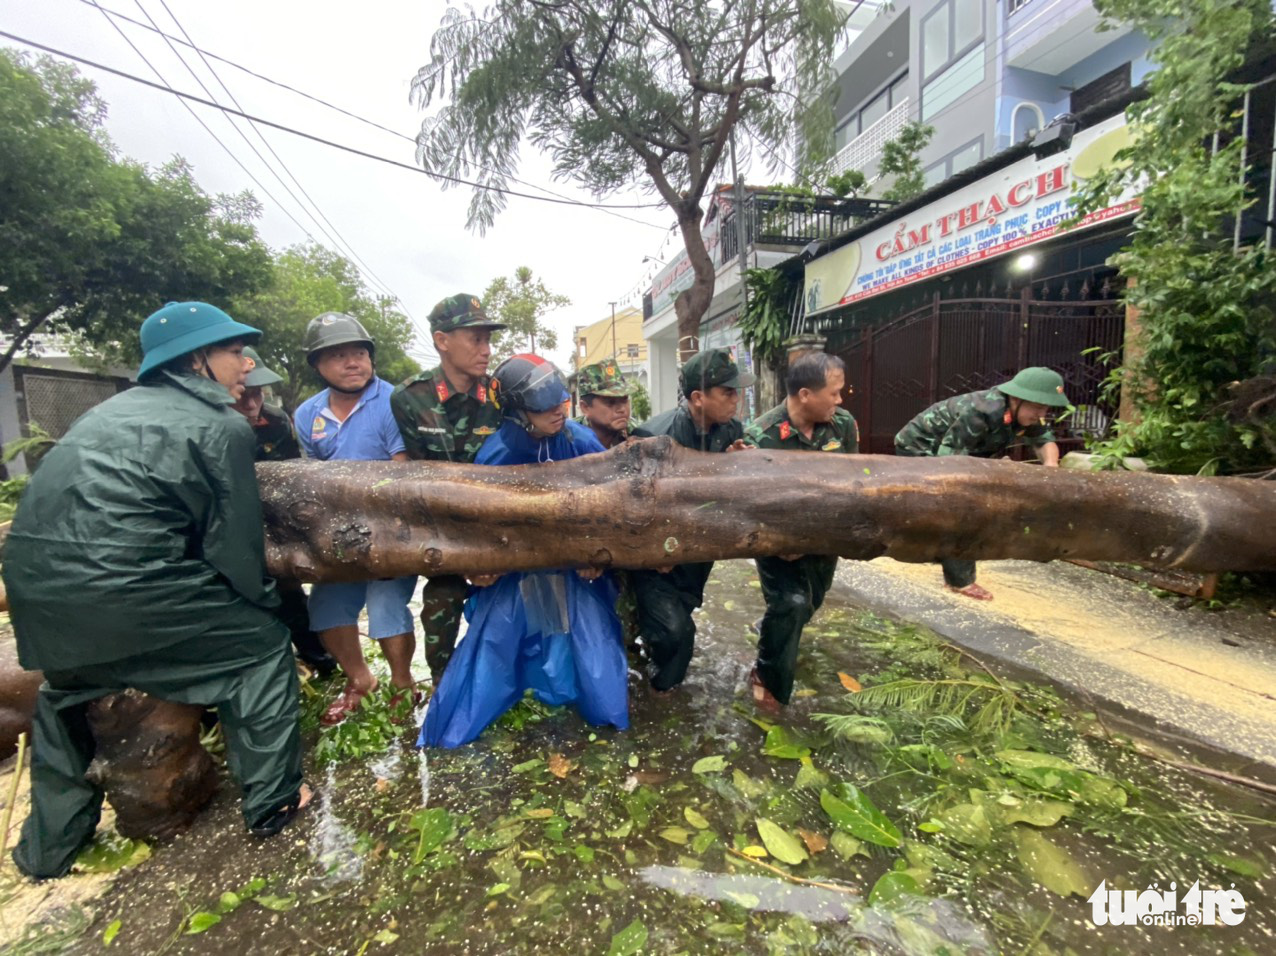 Officers remove an uprooted tree from a street in Quang Nam Province, Vietnam, September 28, 2022. Photo: B.D. / Tuoi Tre